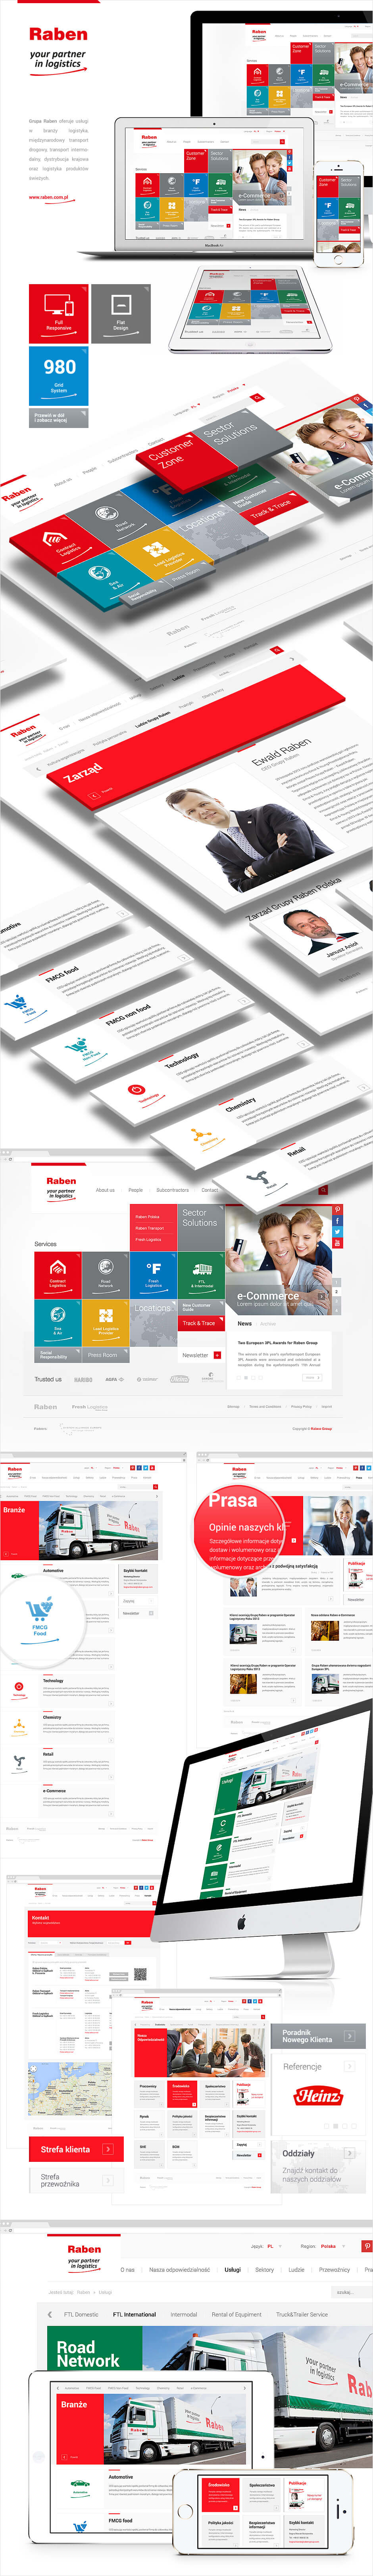 The new website of the logistics giant